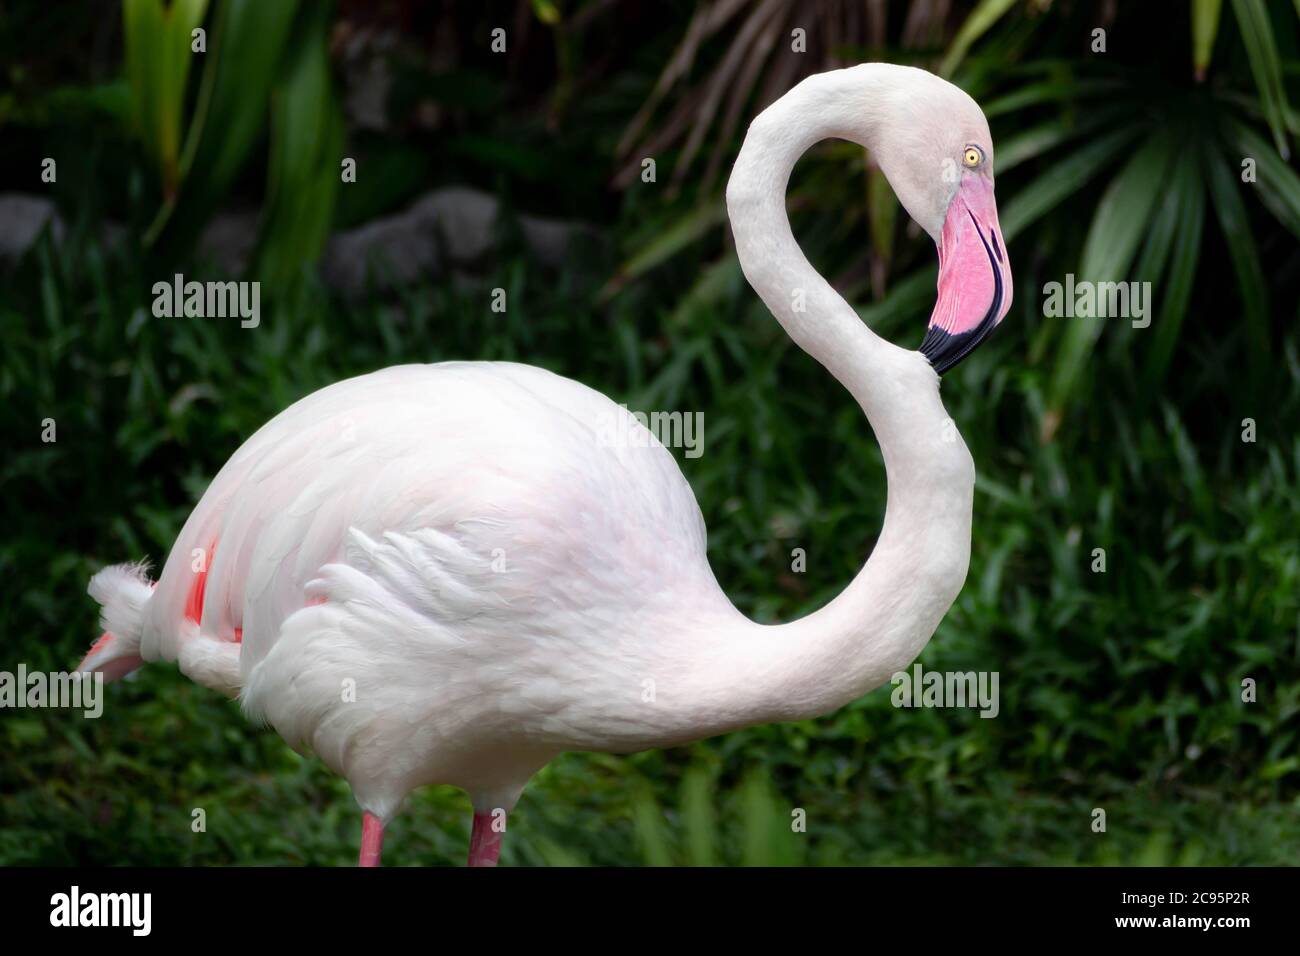 beautiful flamingo standing and relaxing in the wild at national park, pink big bird greater flamingo. Phoenicopterus rubber. animal and nature concep Stock Photo